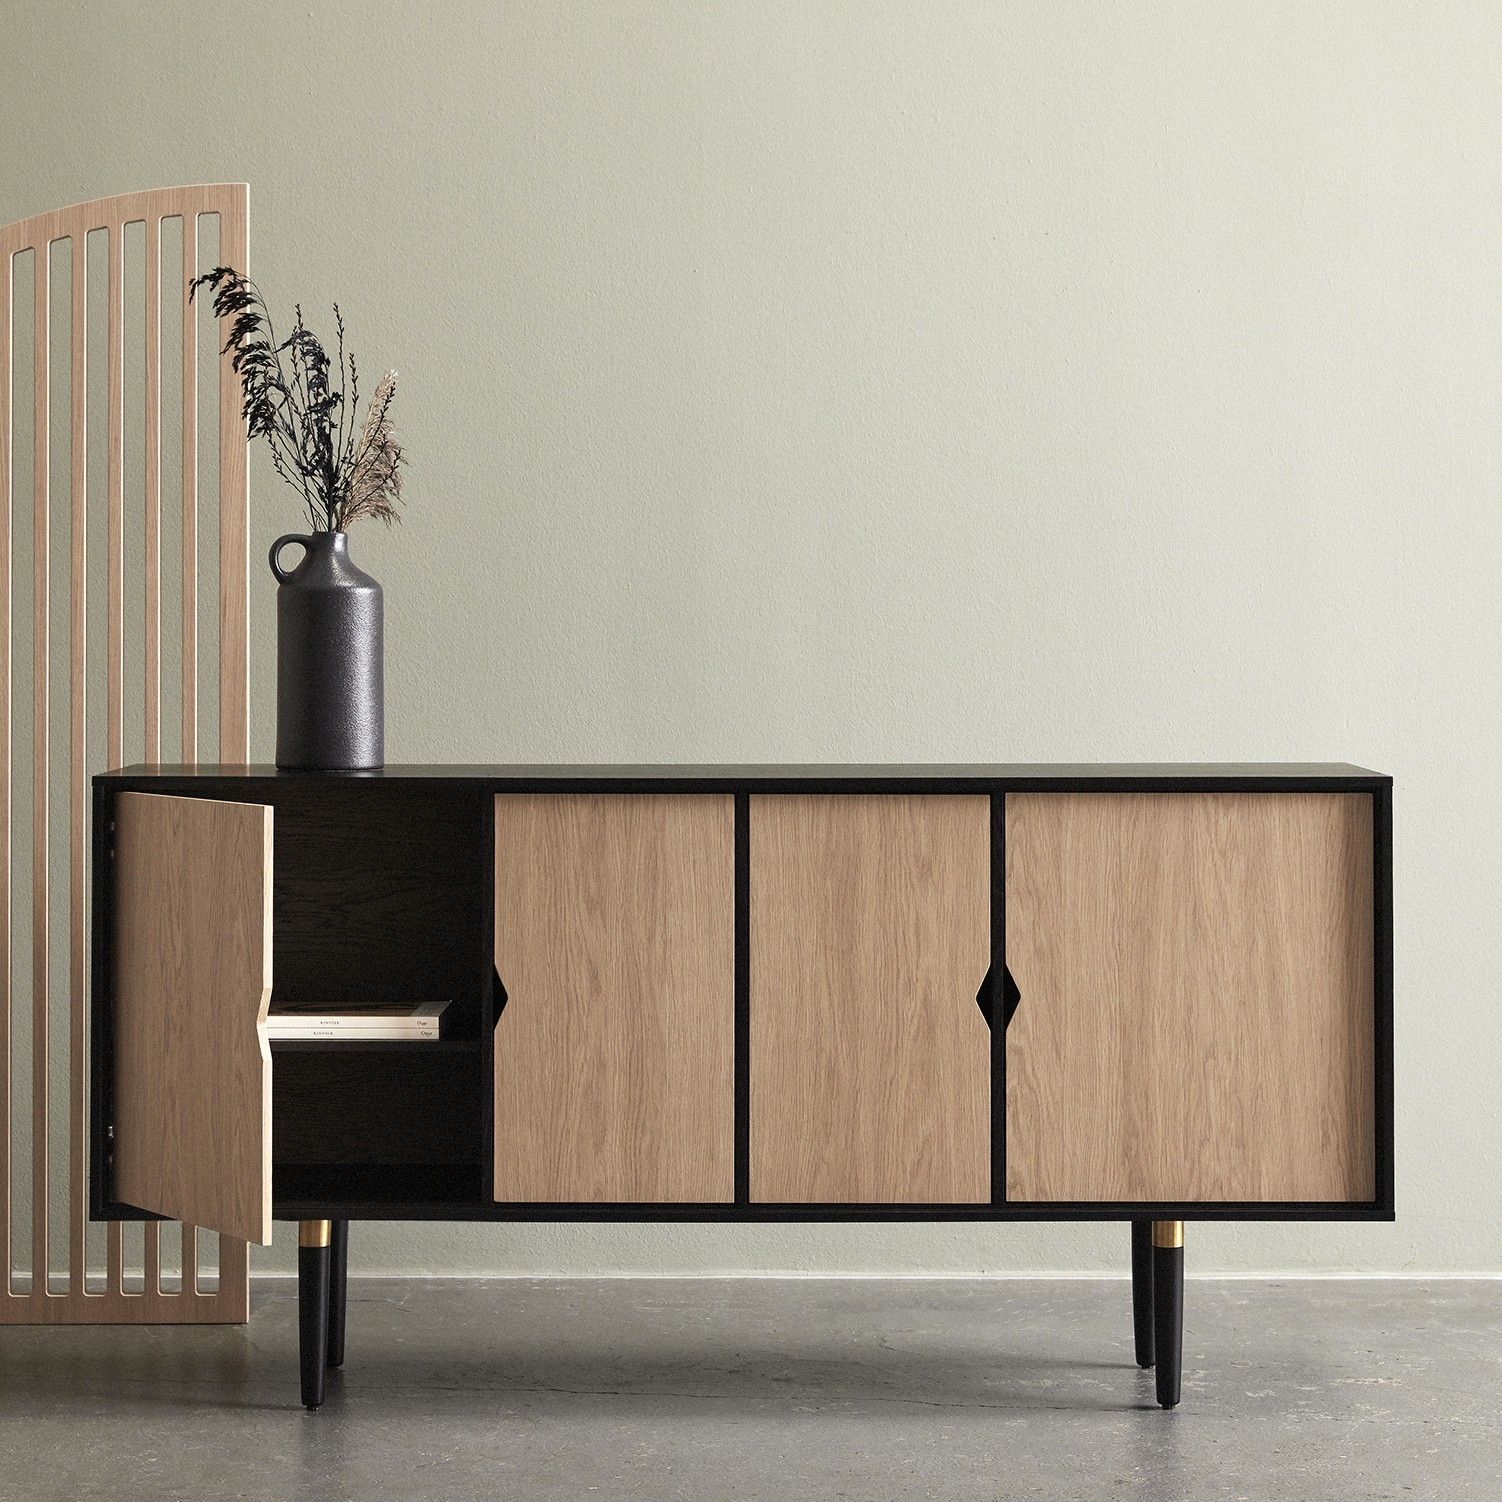 Unique Sideboard – Black Oak – Andersen Throughout Latest Gray Wooden Sideboards (View 15 of 15)